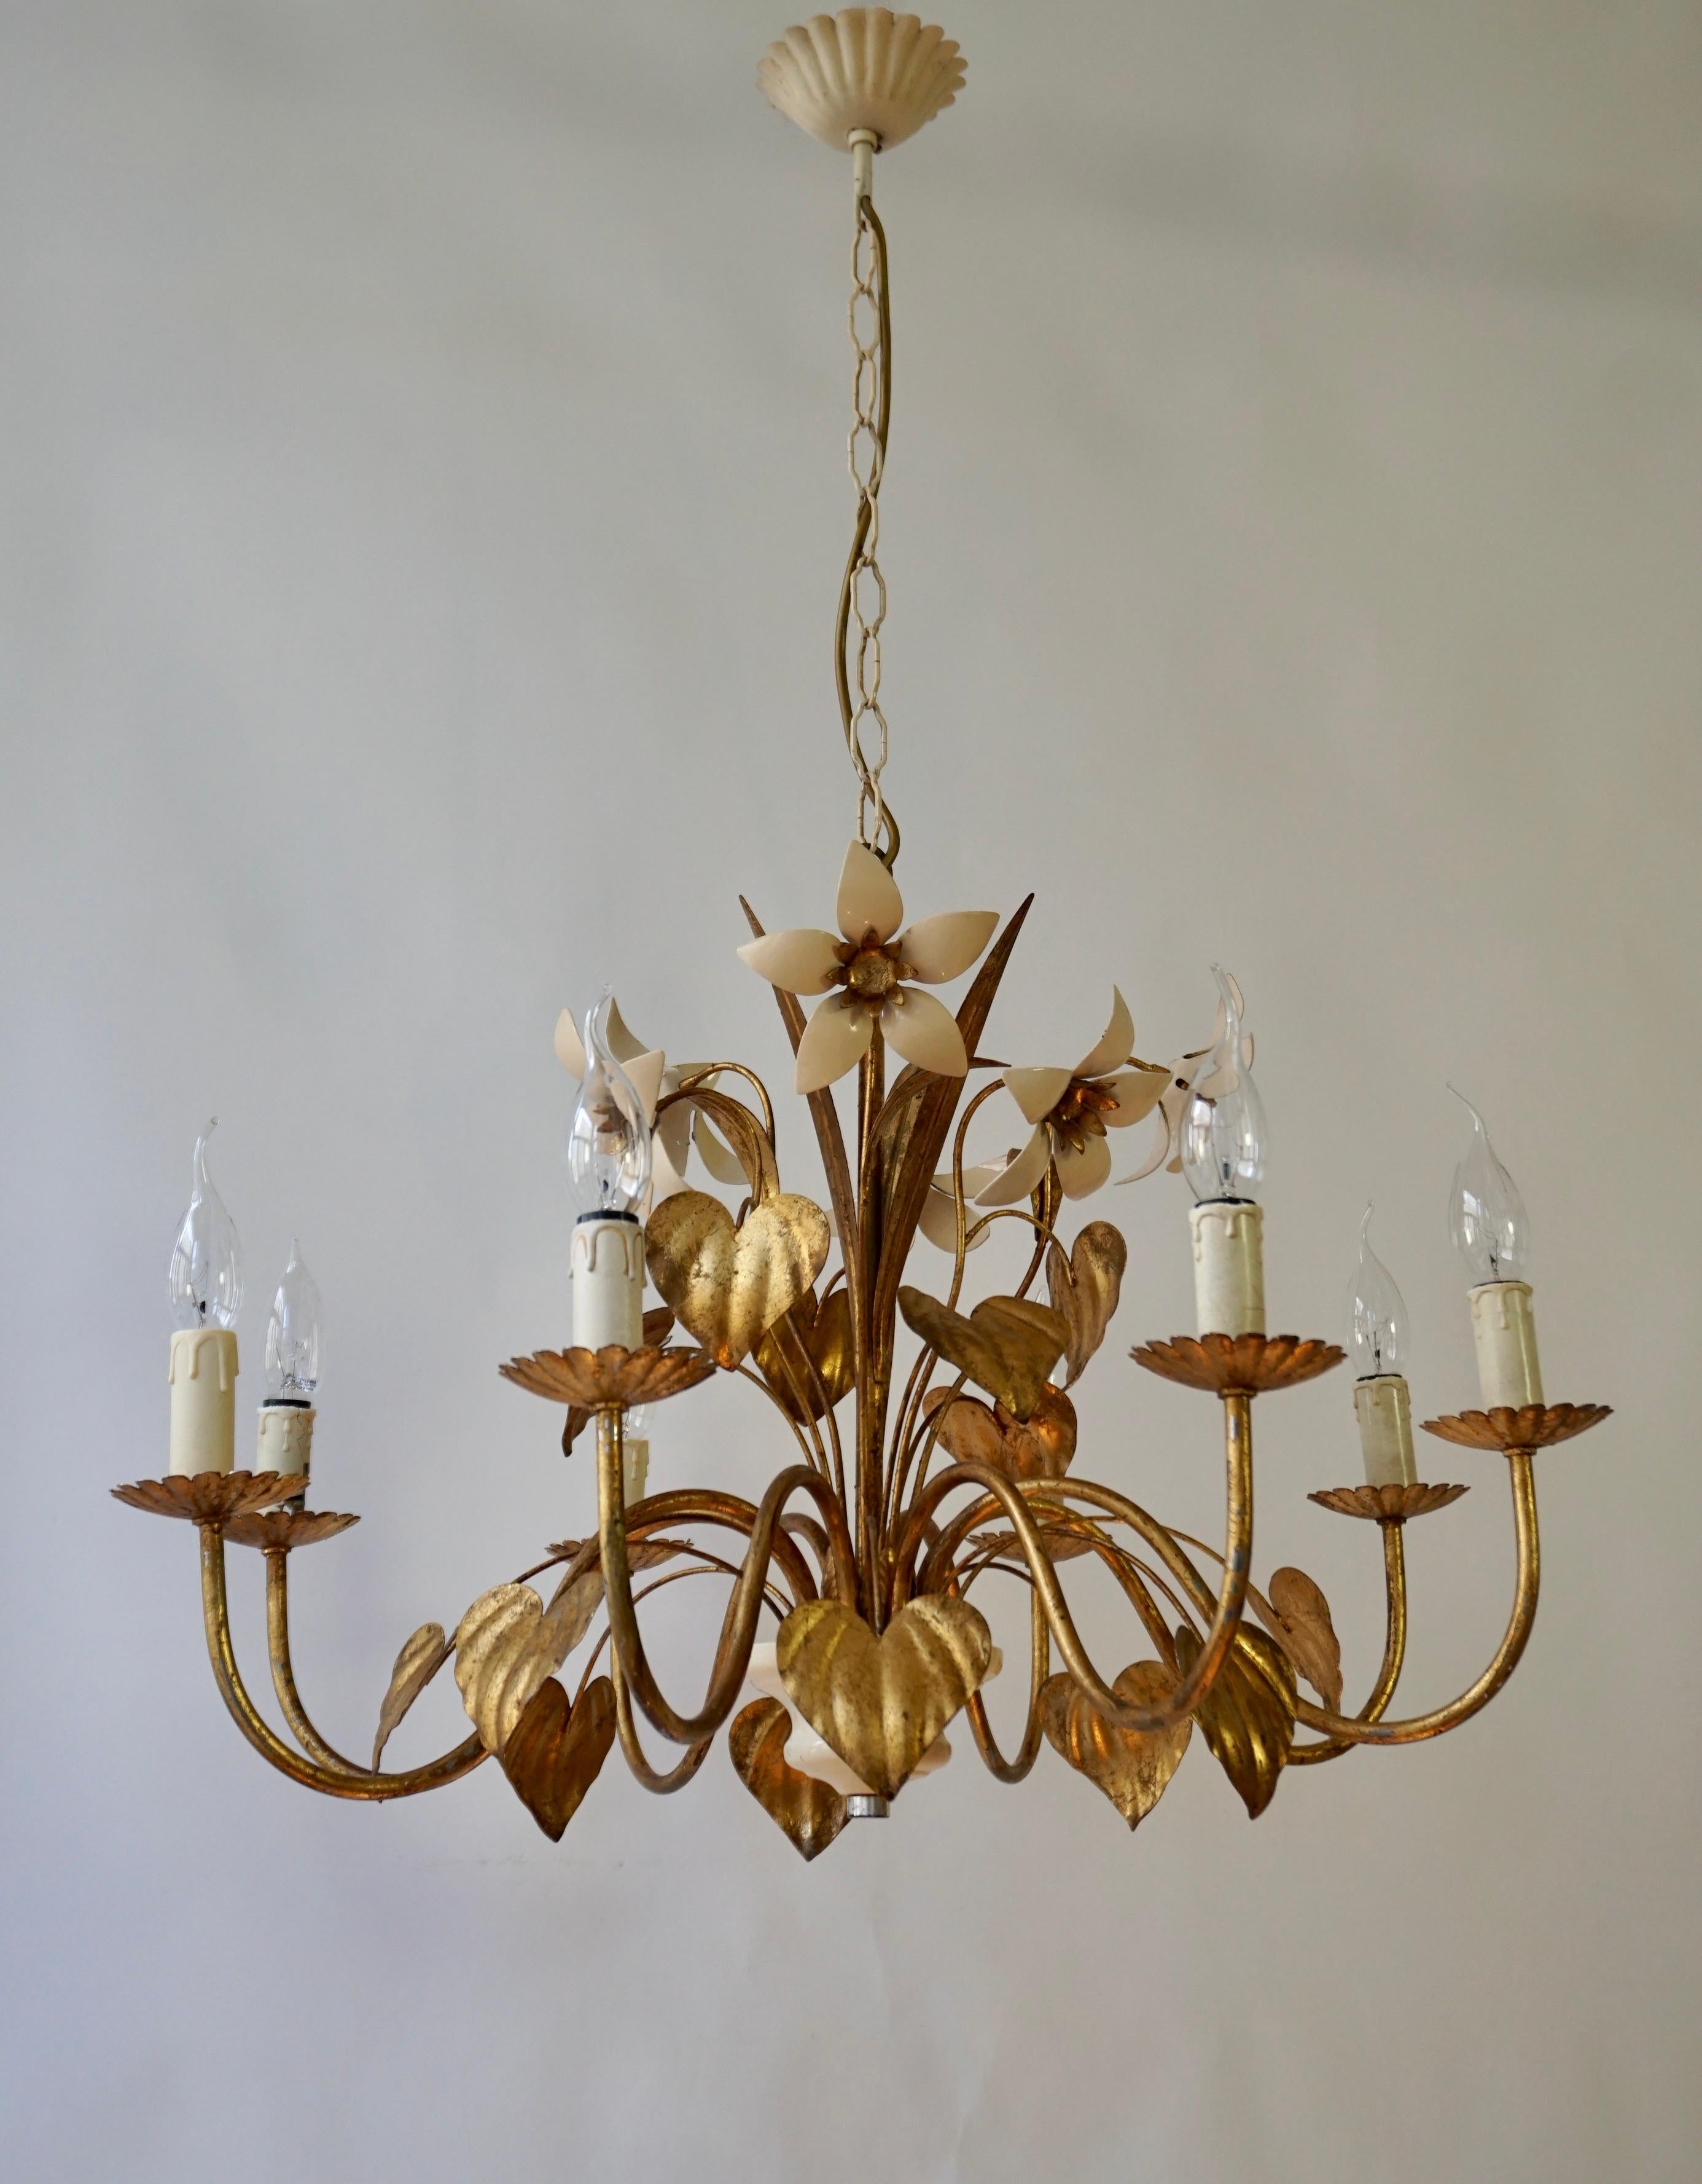 This beautiful gilt chandelier was designed and manufactured in Germany in the 1970s by Hans Kögl Leuchten. It features 5 lights and is made of antique gold-plated metal and off-white lacquered blossoms. Kögls designs were inspired by natural shapes